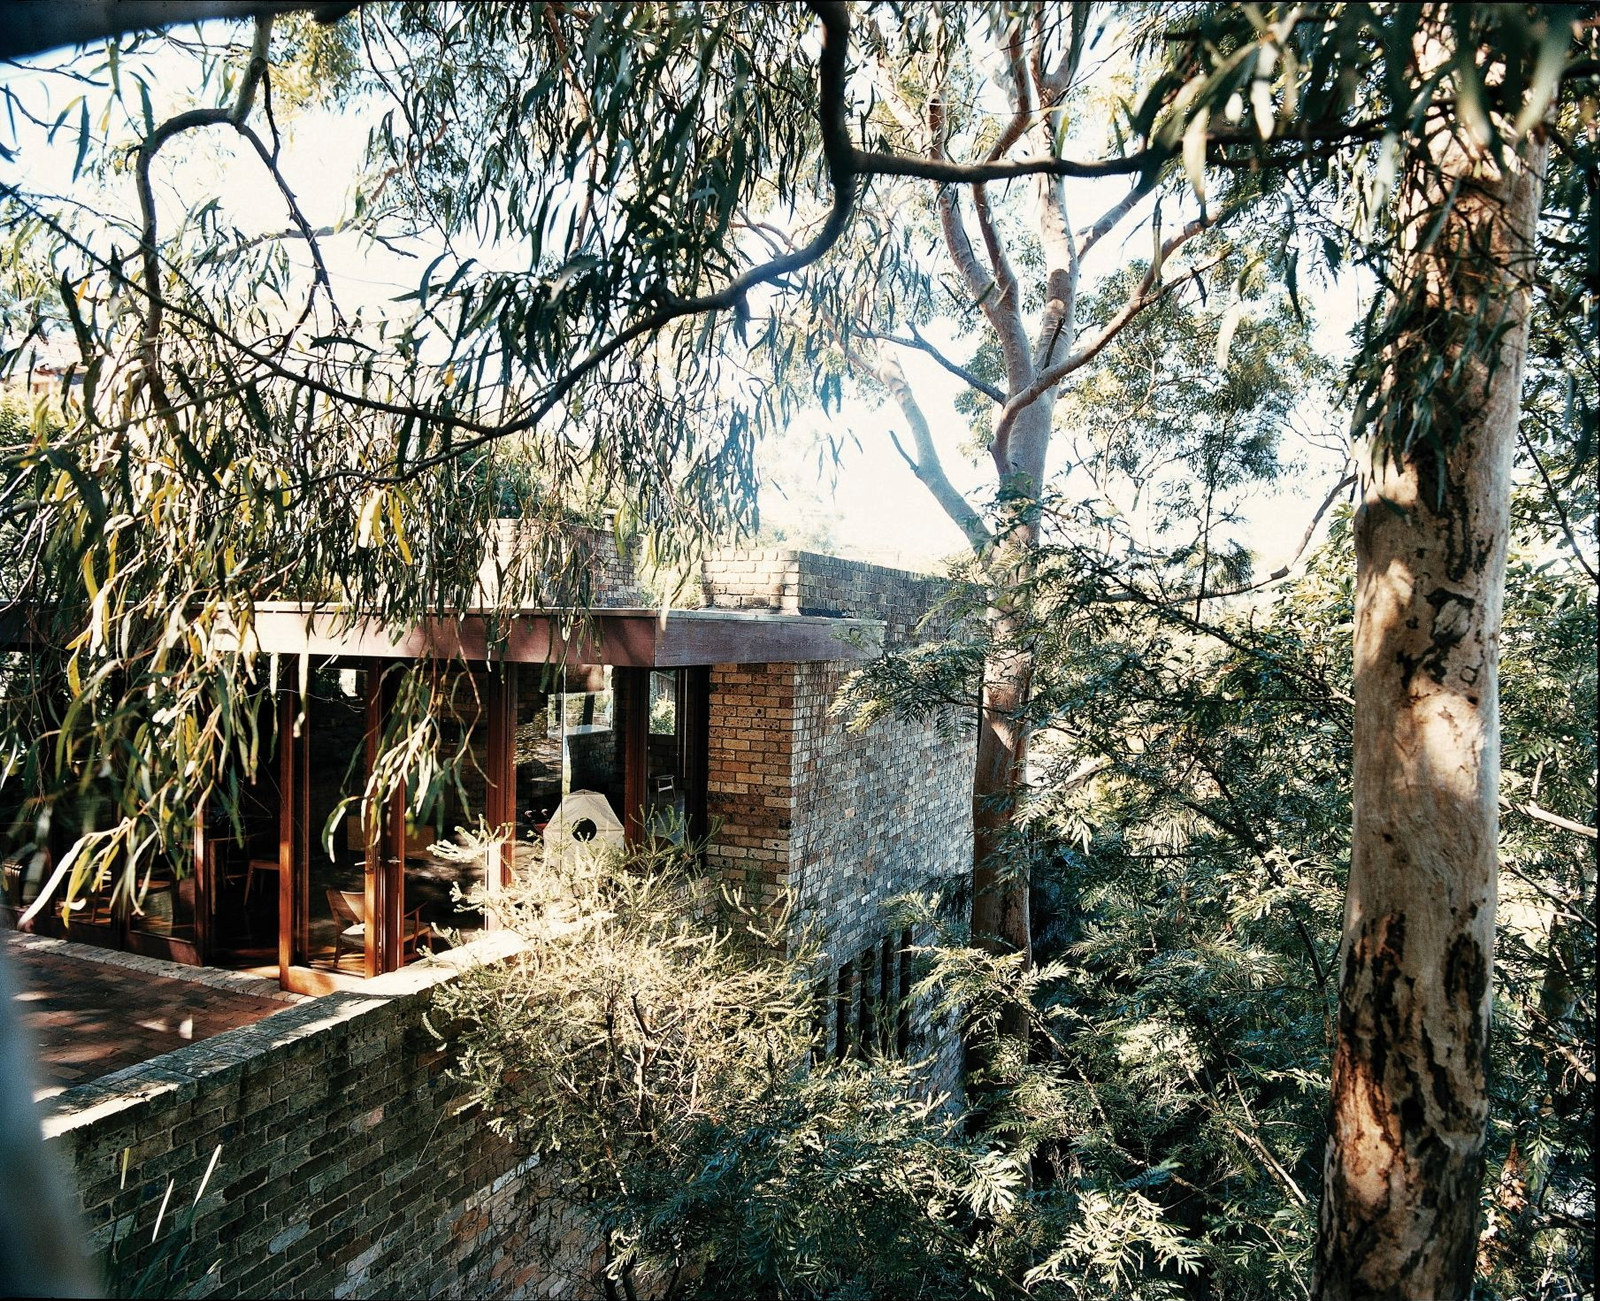 This is a photograph of a light coloured brick house set among native plants and trees